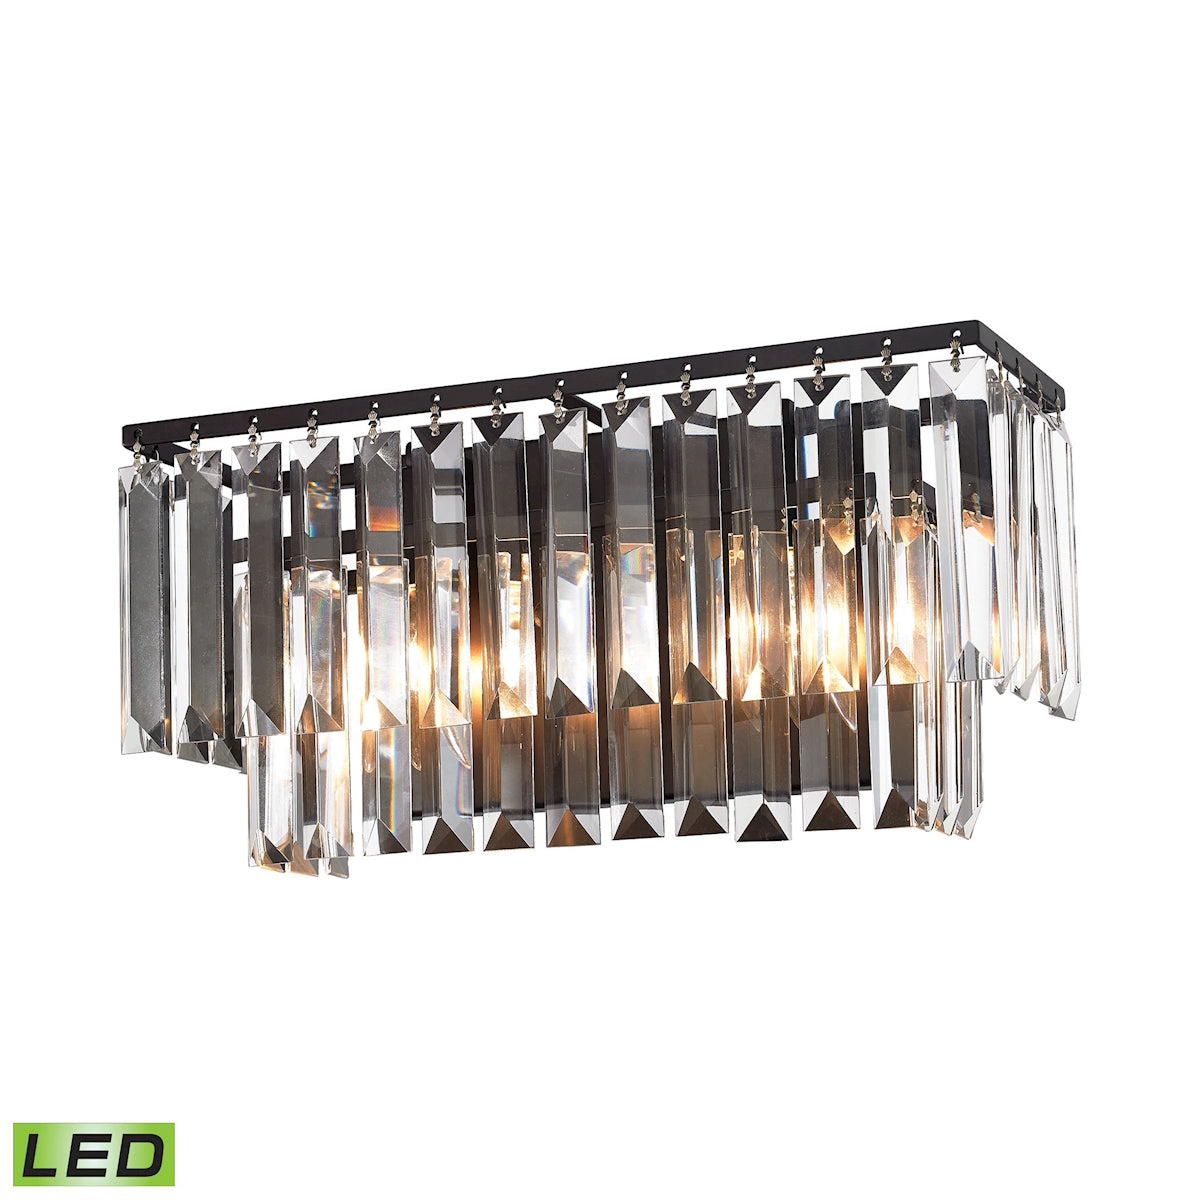 ELK Lighting 15221/2-LED Palacial 2-Light Vanity Sconce in Oil Rubbed Bronze with Clear Crystal - Includes LED Bulbs